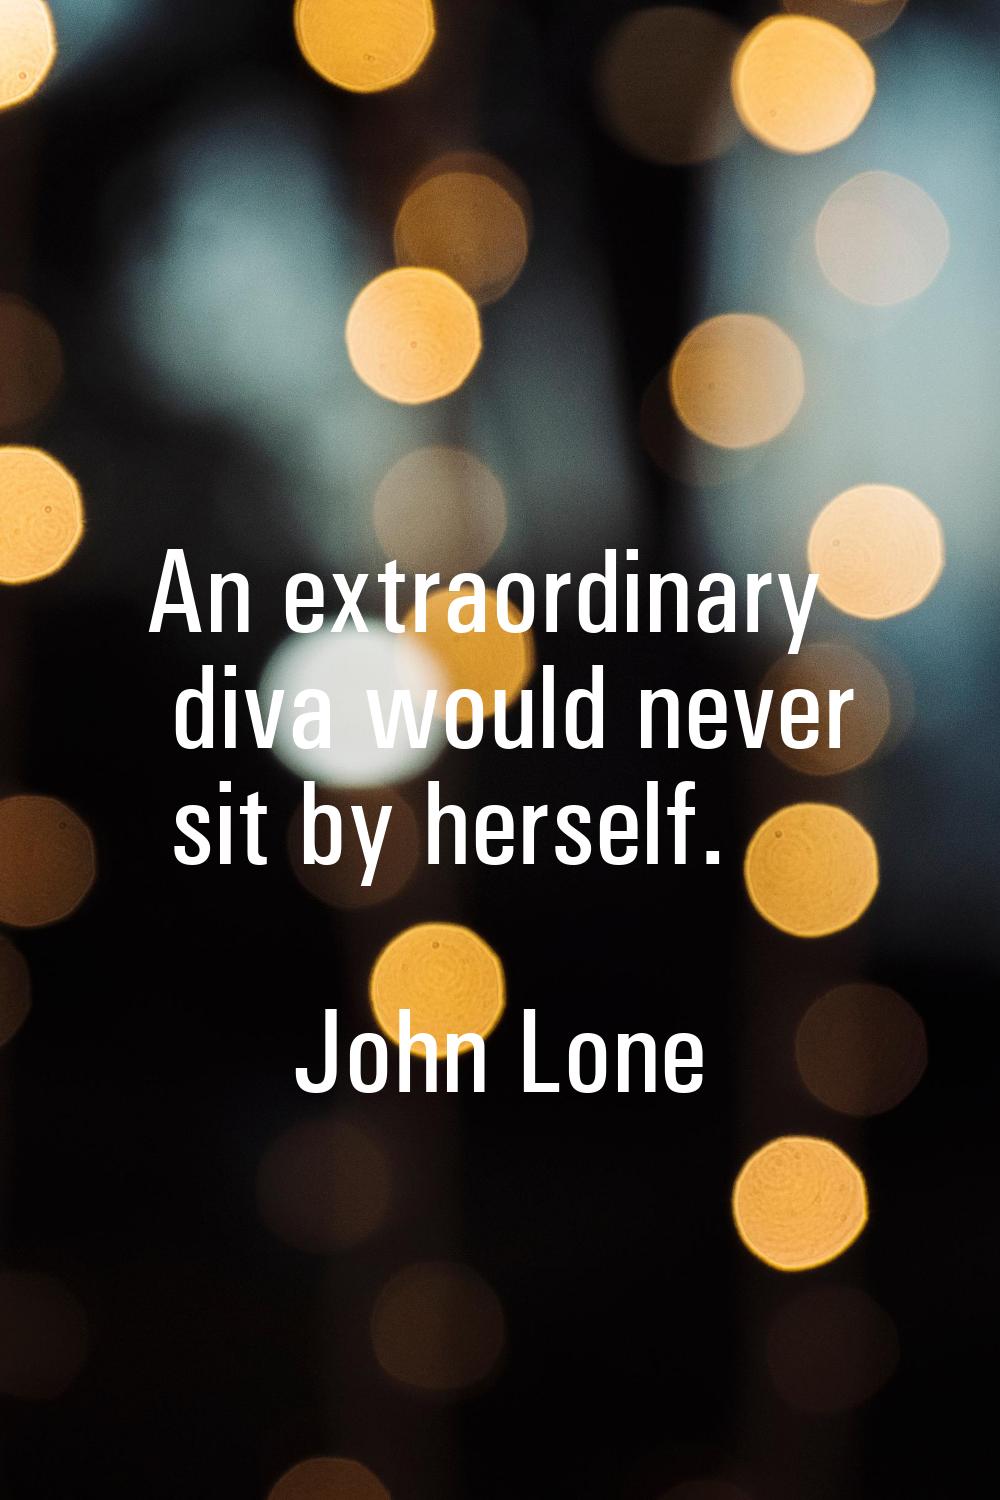 An extraordinary diva would never sit by herself.